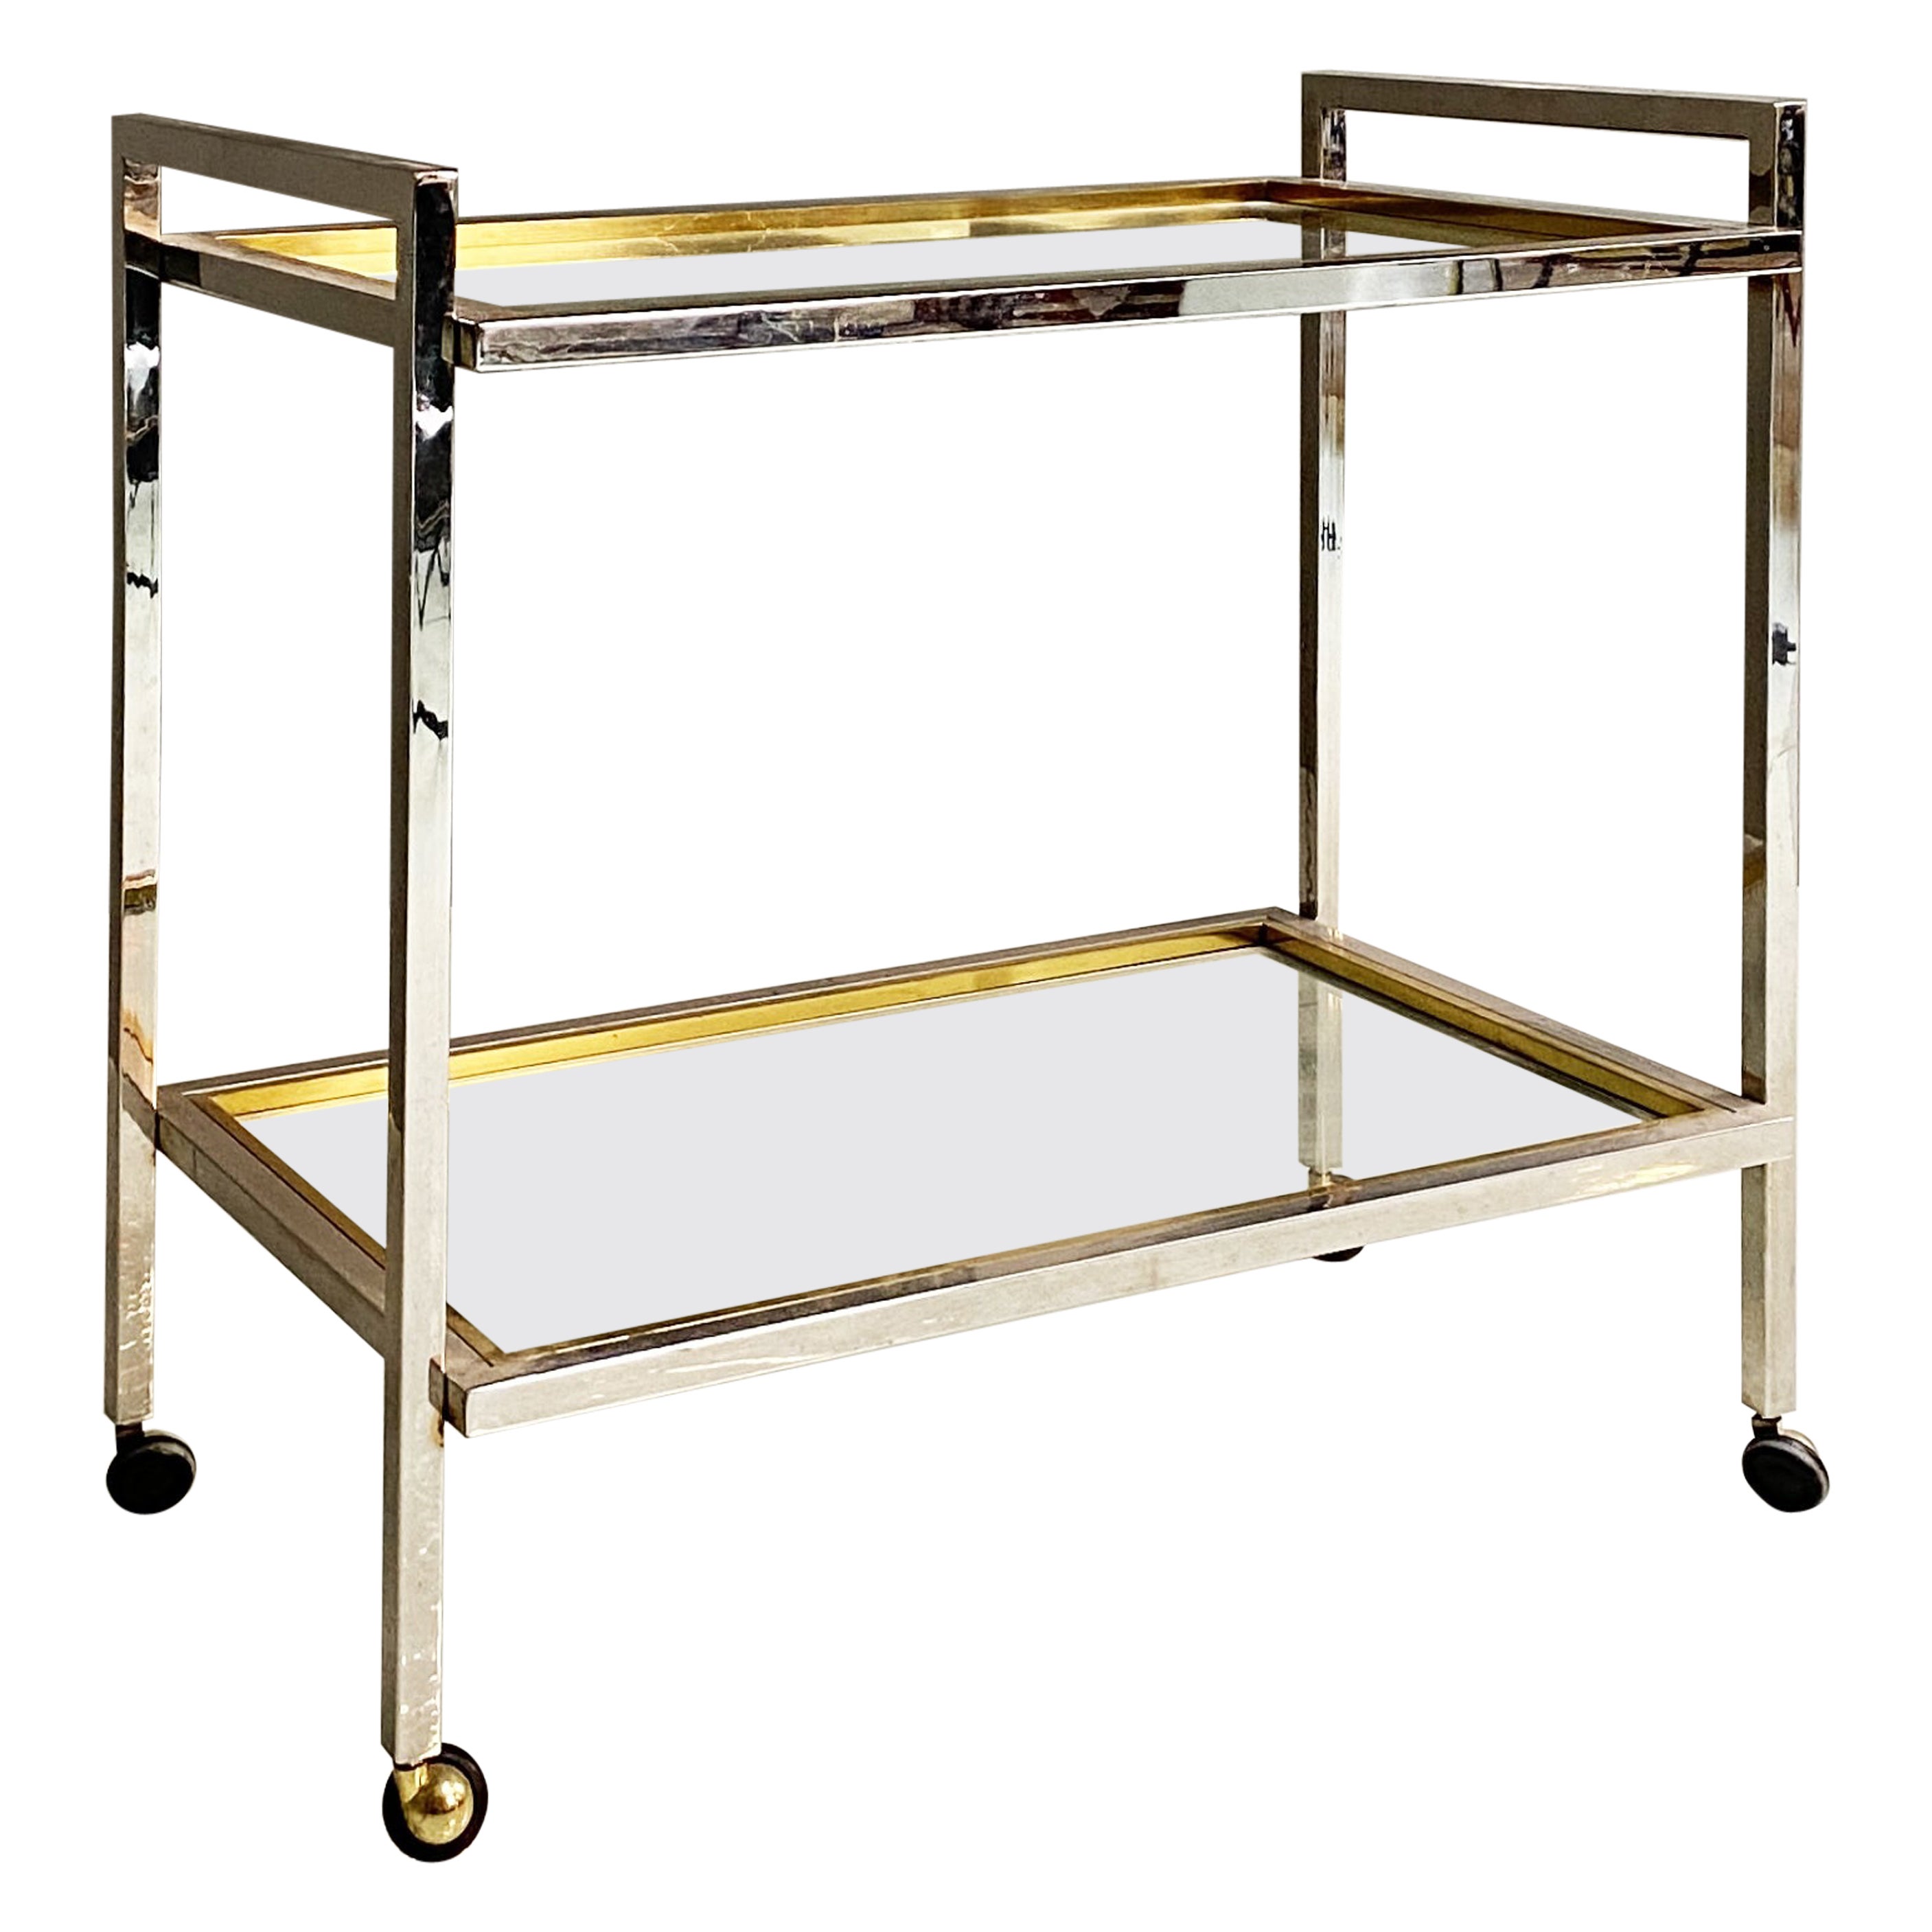 Italian Mid-Century Modern Steel and Brass Cart with Two Shelves, 1970s